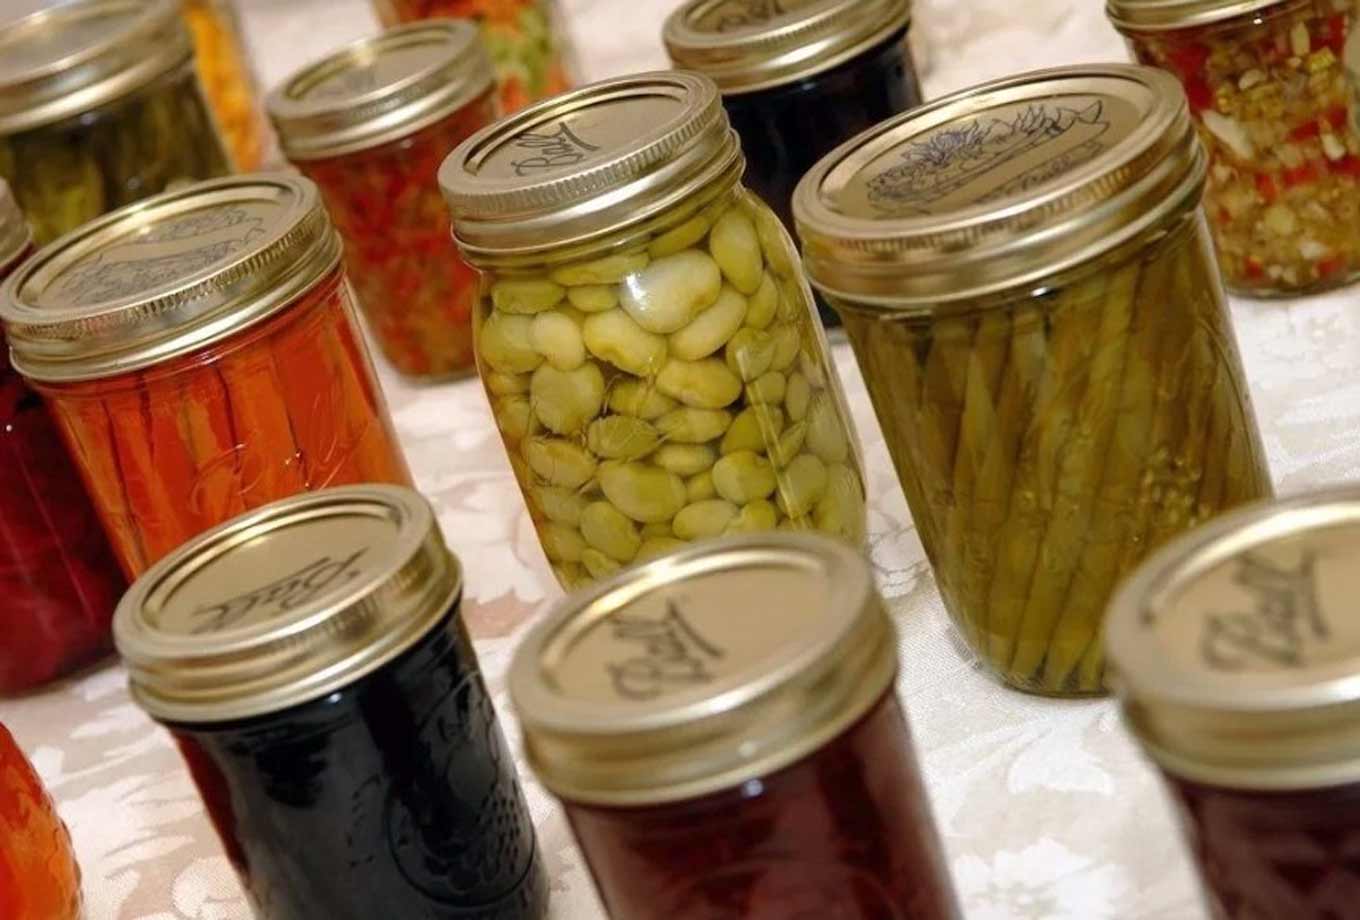 A variety of vegetables and fruits preserved in glass jars